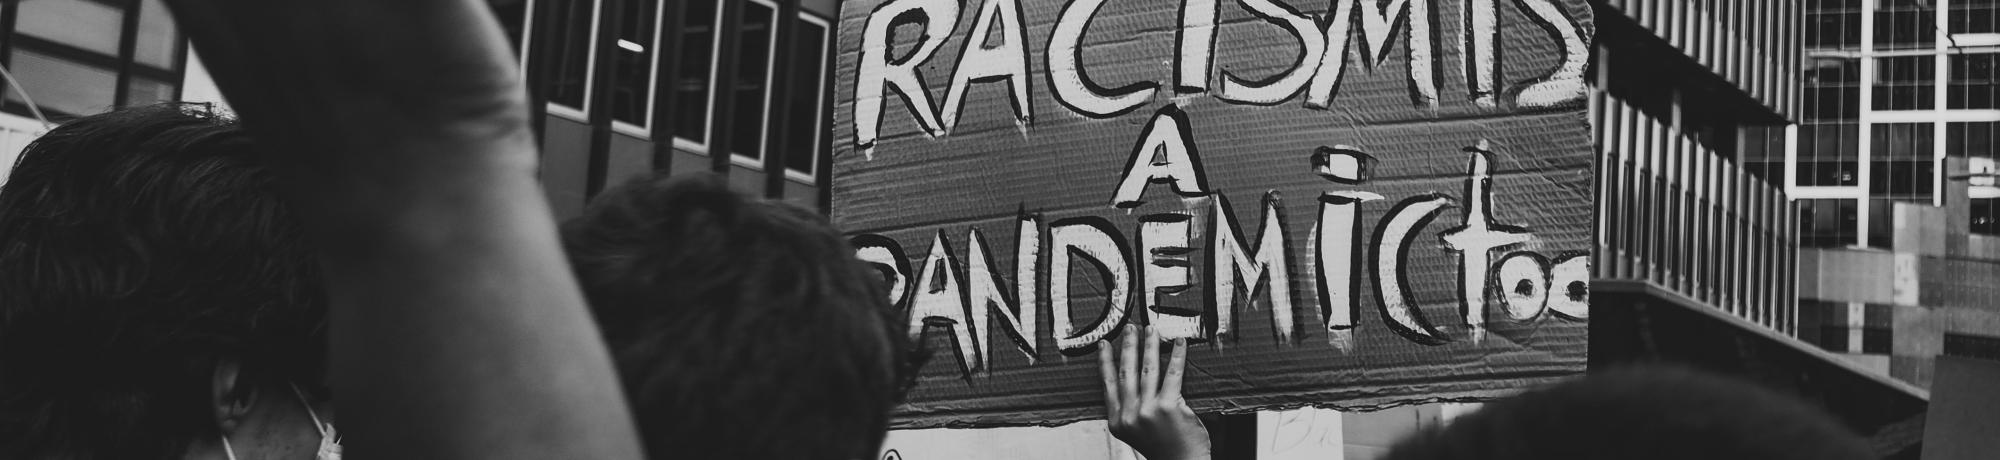 Racism is a pandemic too